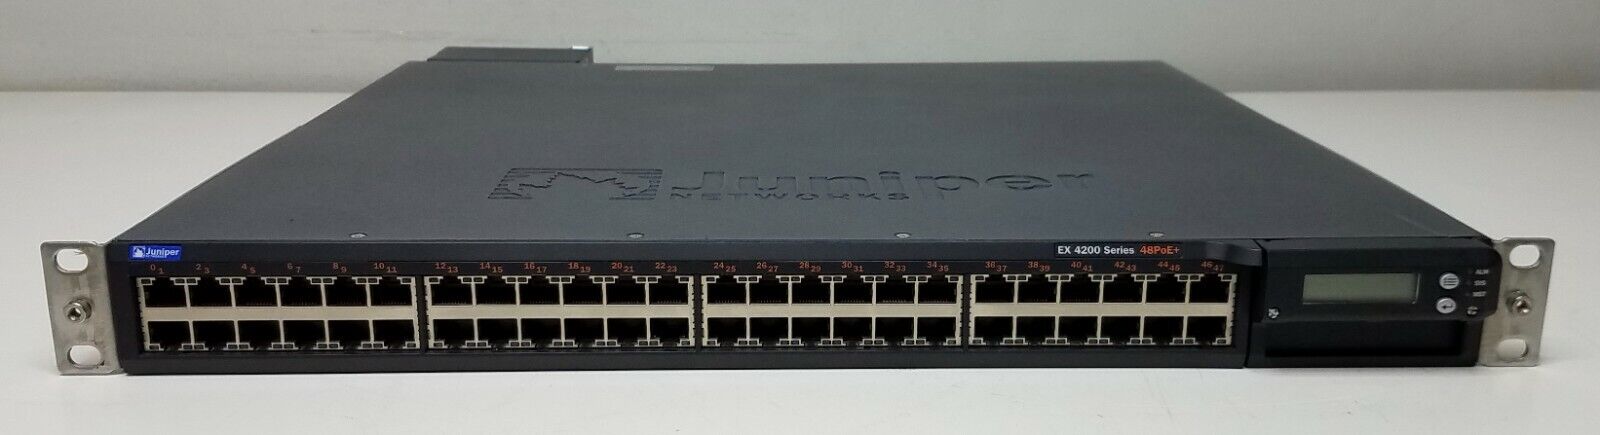 Juniper Networks EX 4200 Series 48PoE+ Managed Switch Single Power Supply